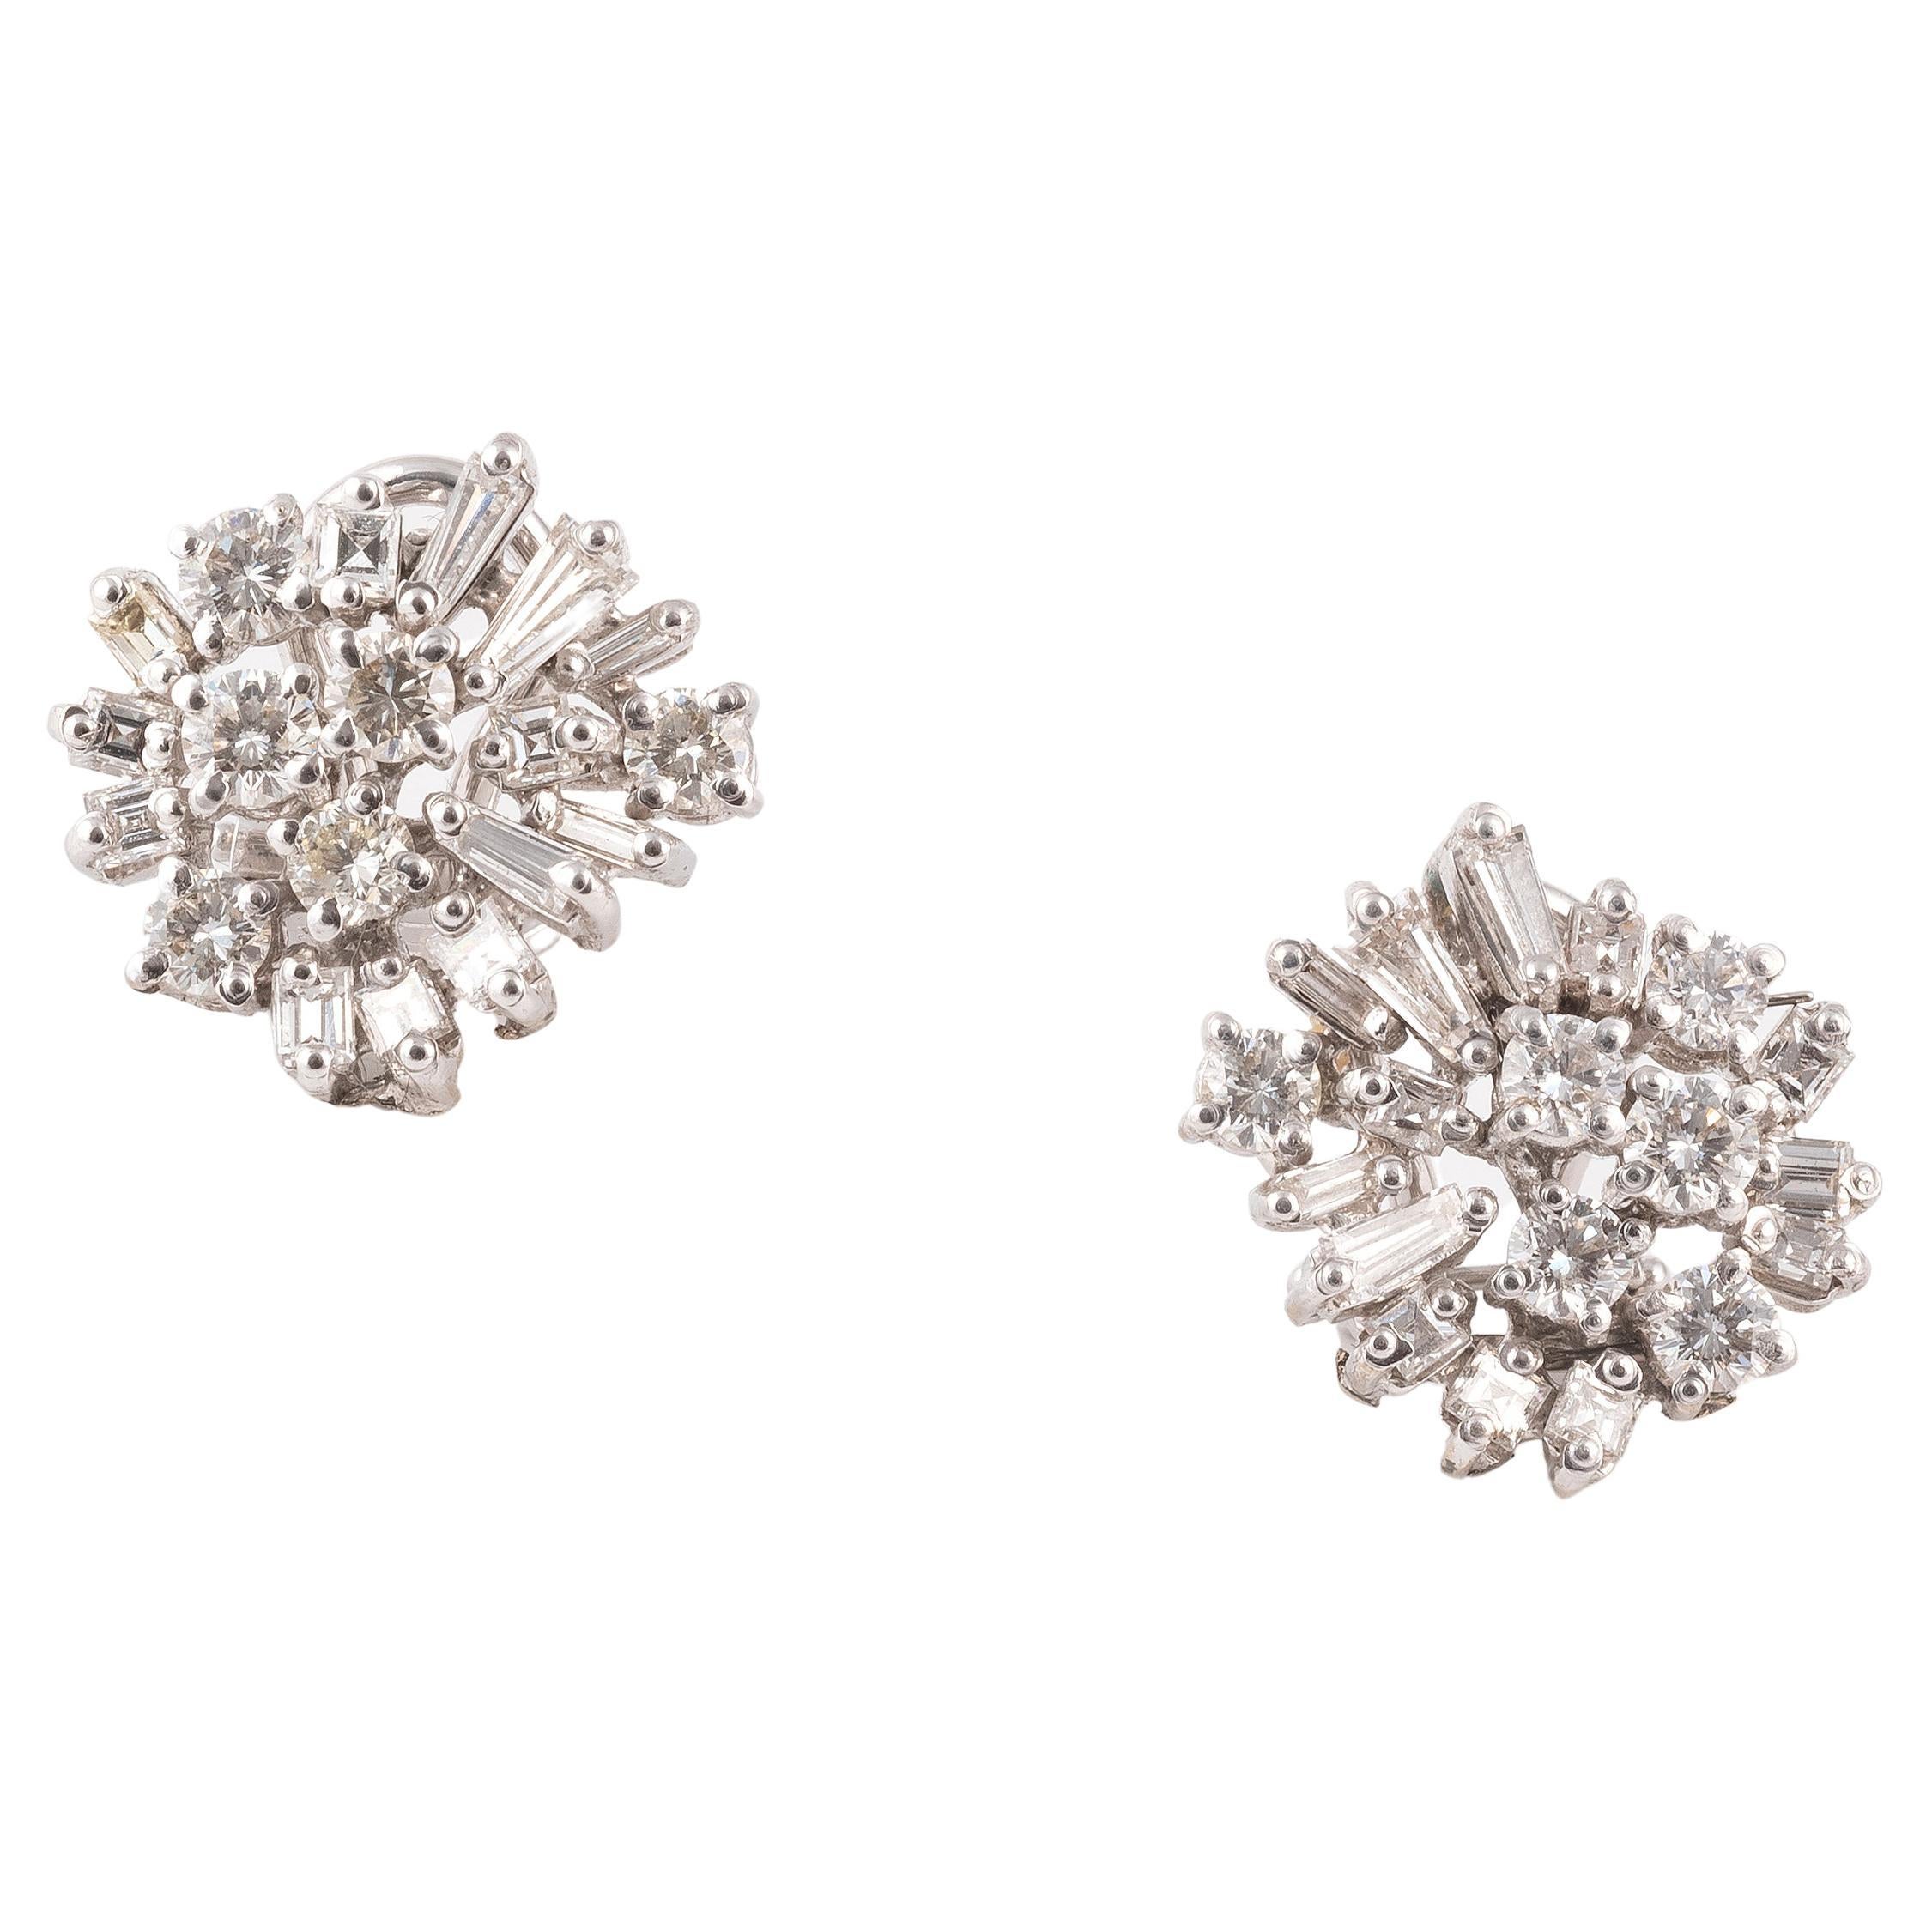 Baguette Cut 18kt White Gold and Diamond Cluster Earrings